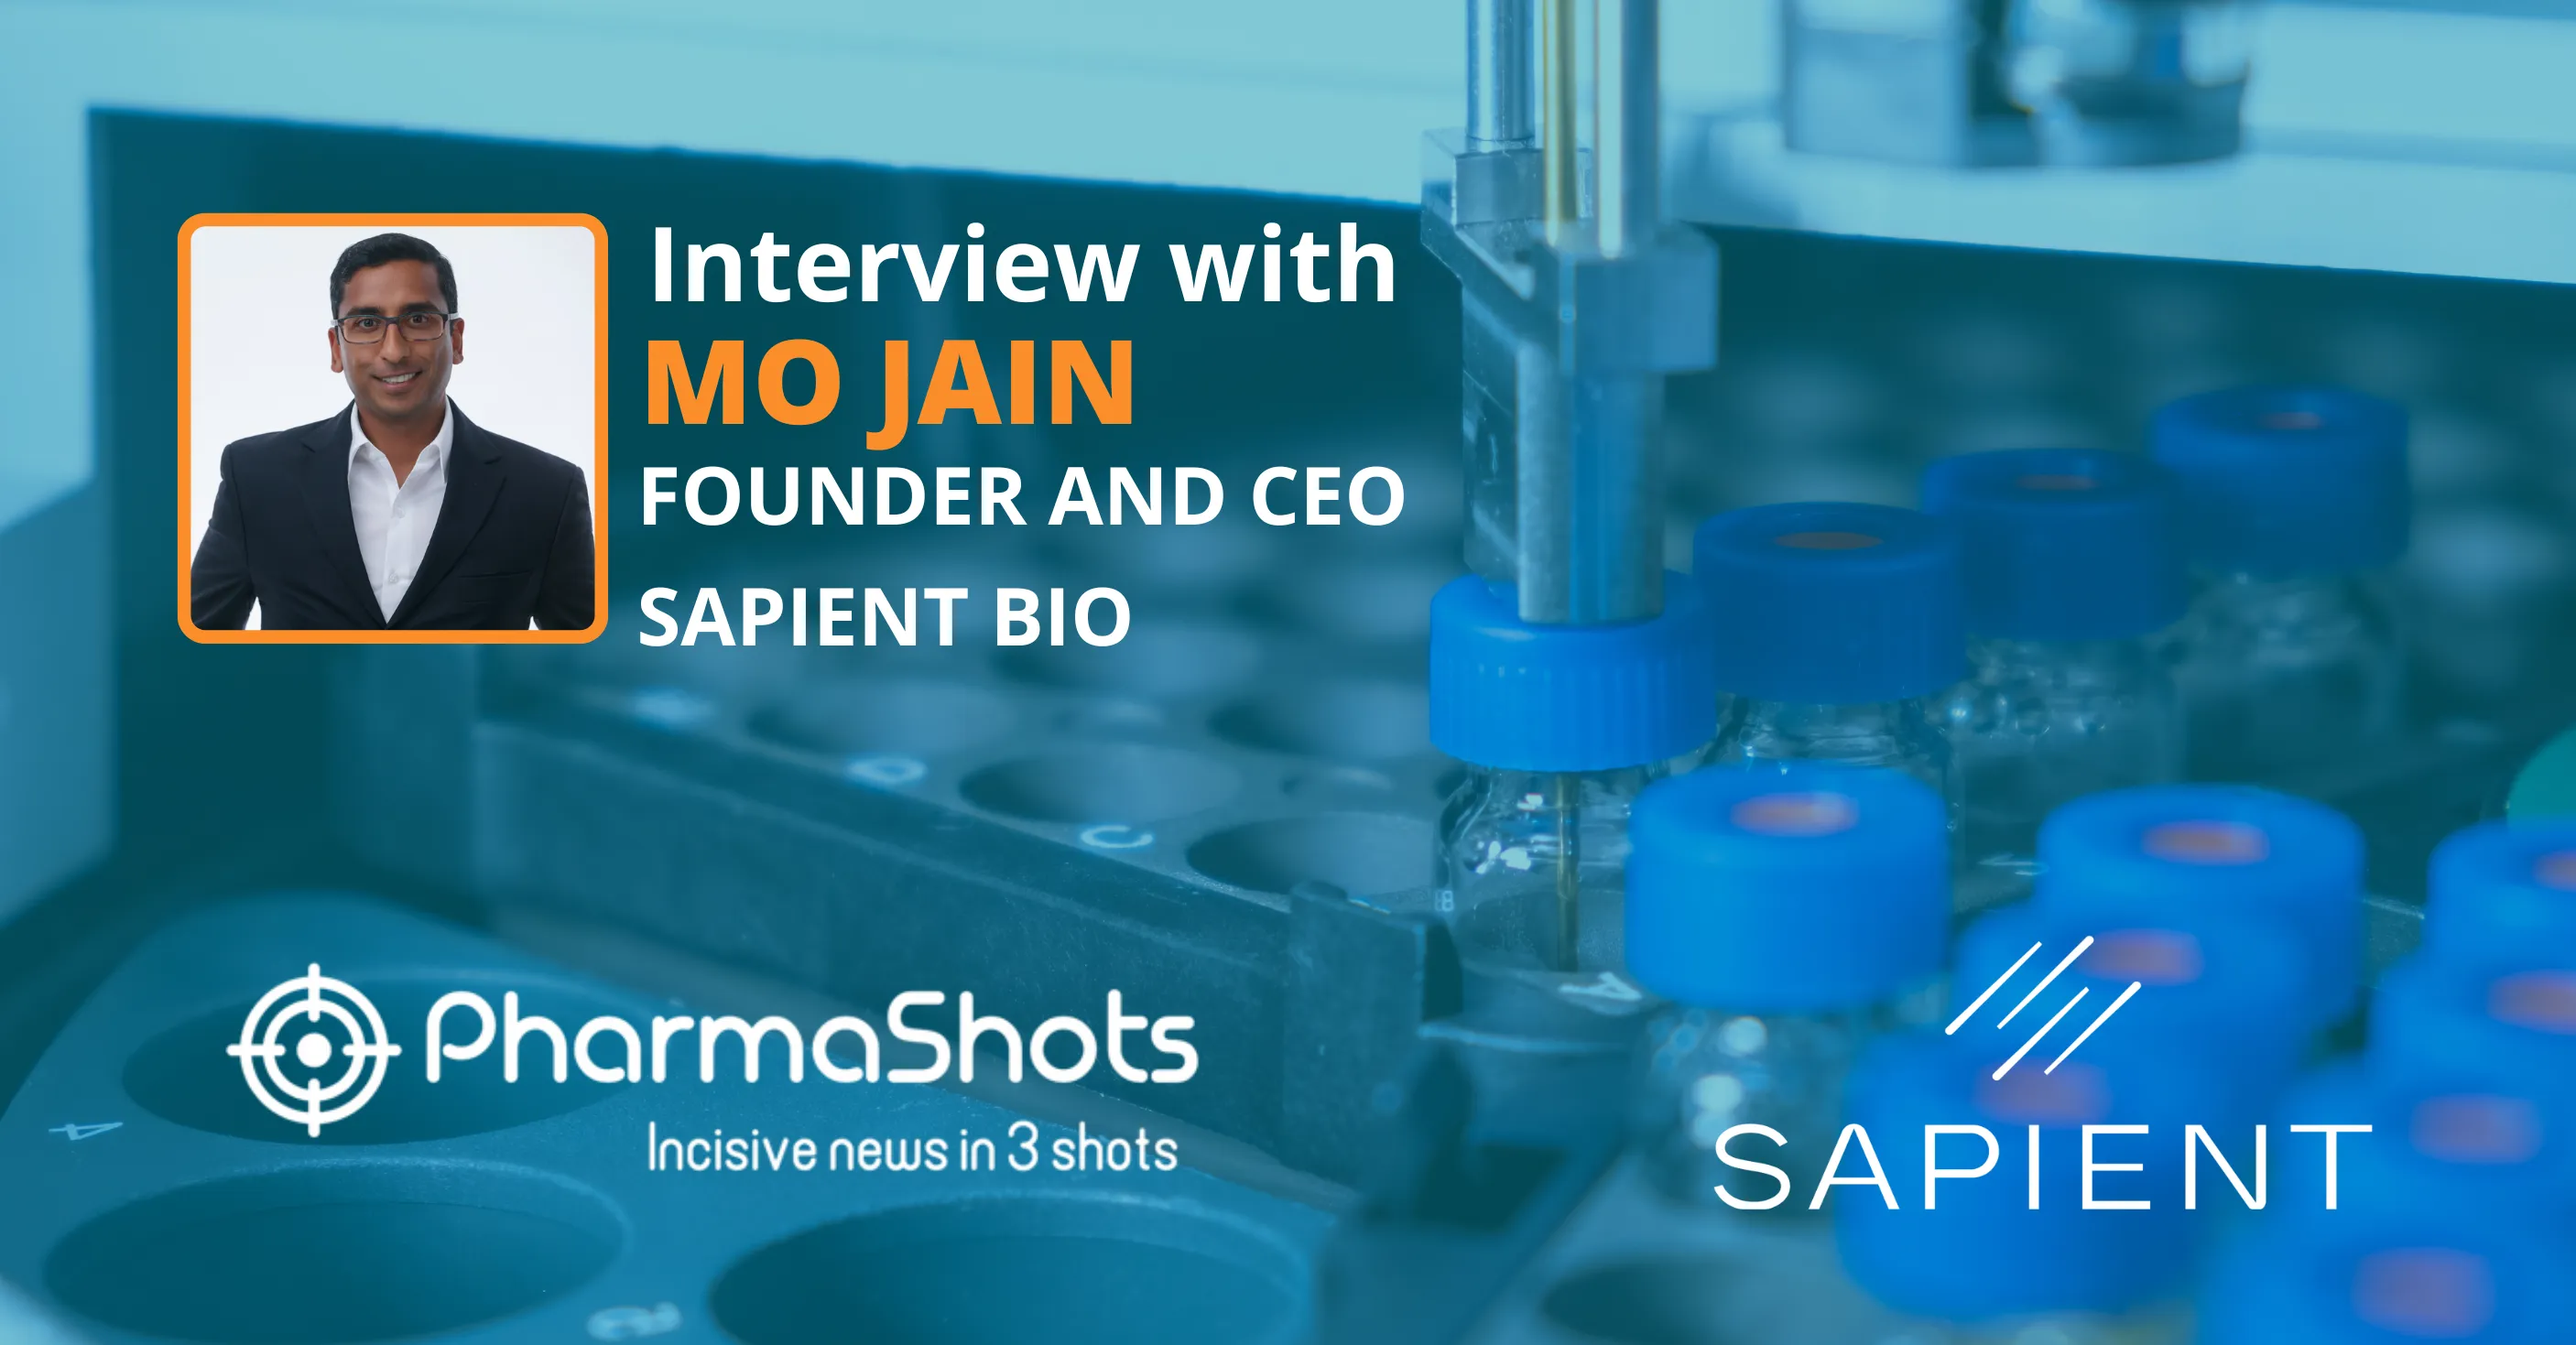 Expanding Services: Mo Jain Sheds Light on Sapient’s Recently Launched Discovery Proteomics Services